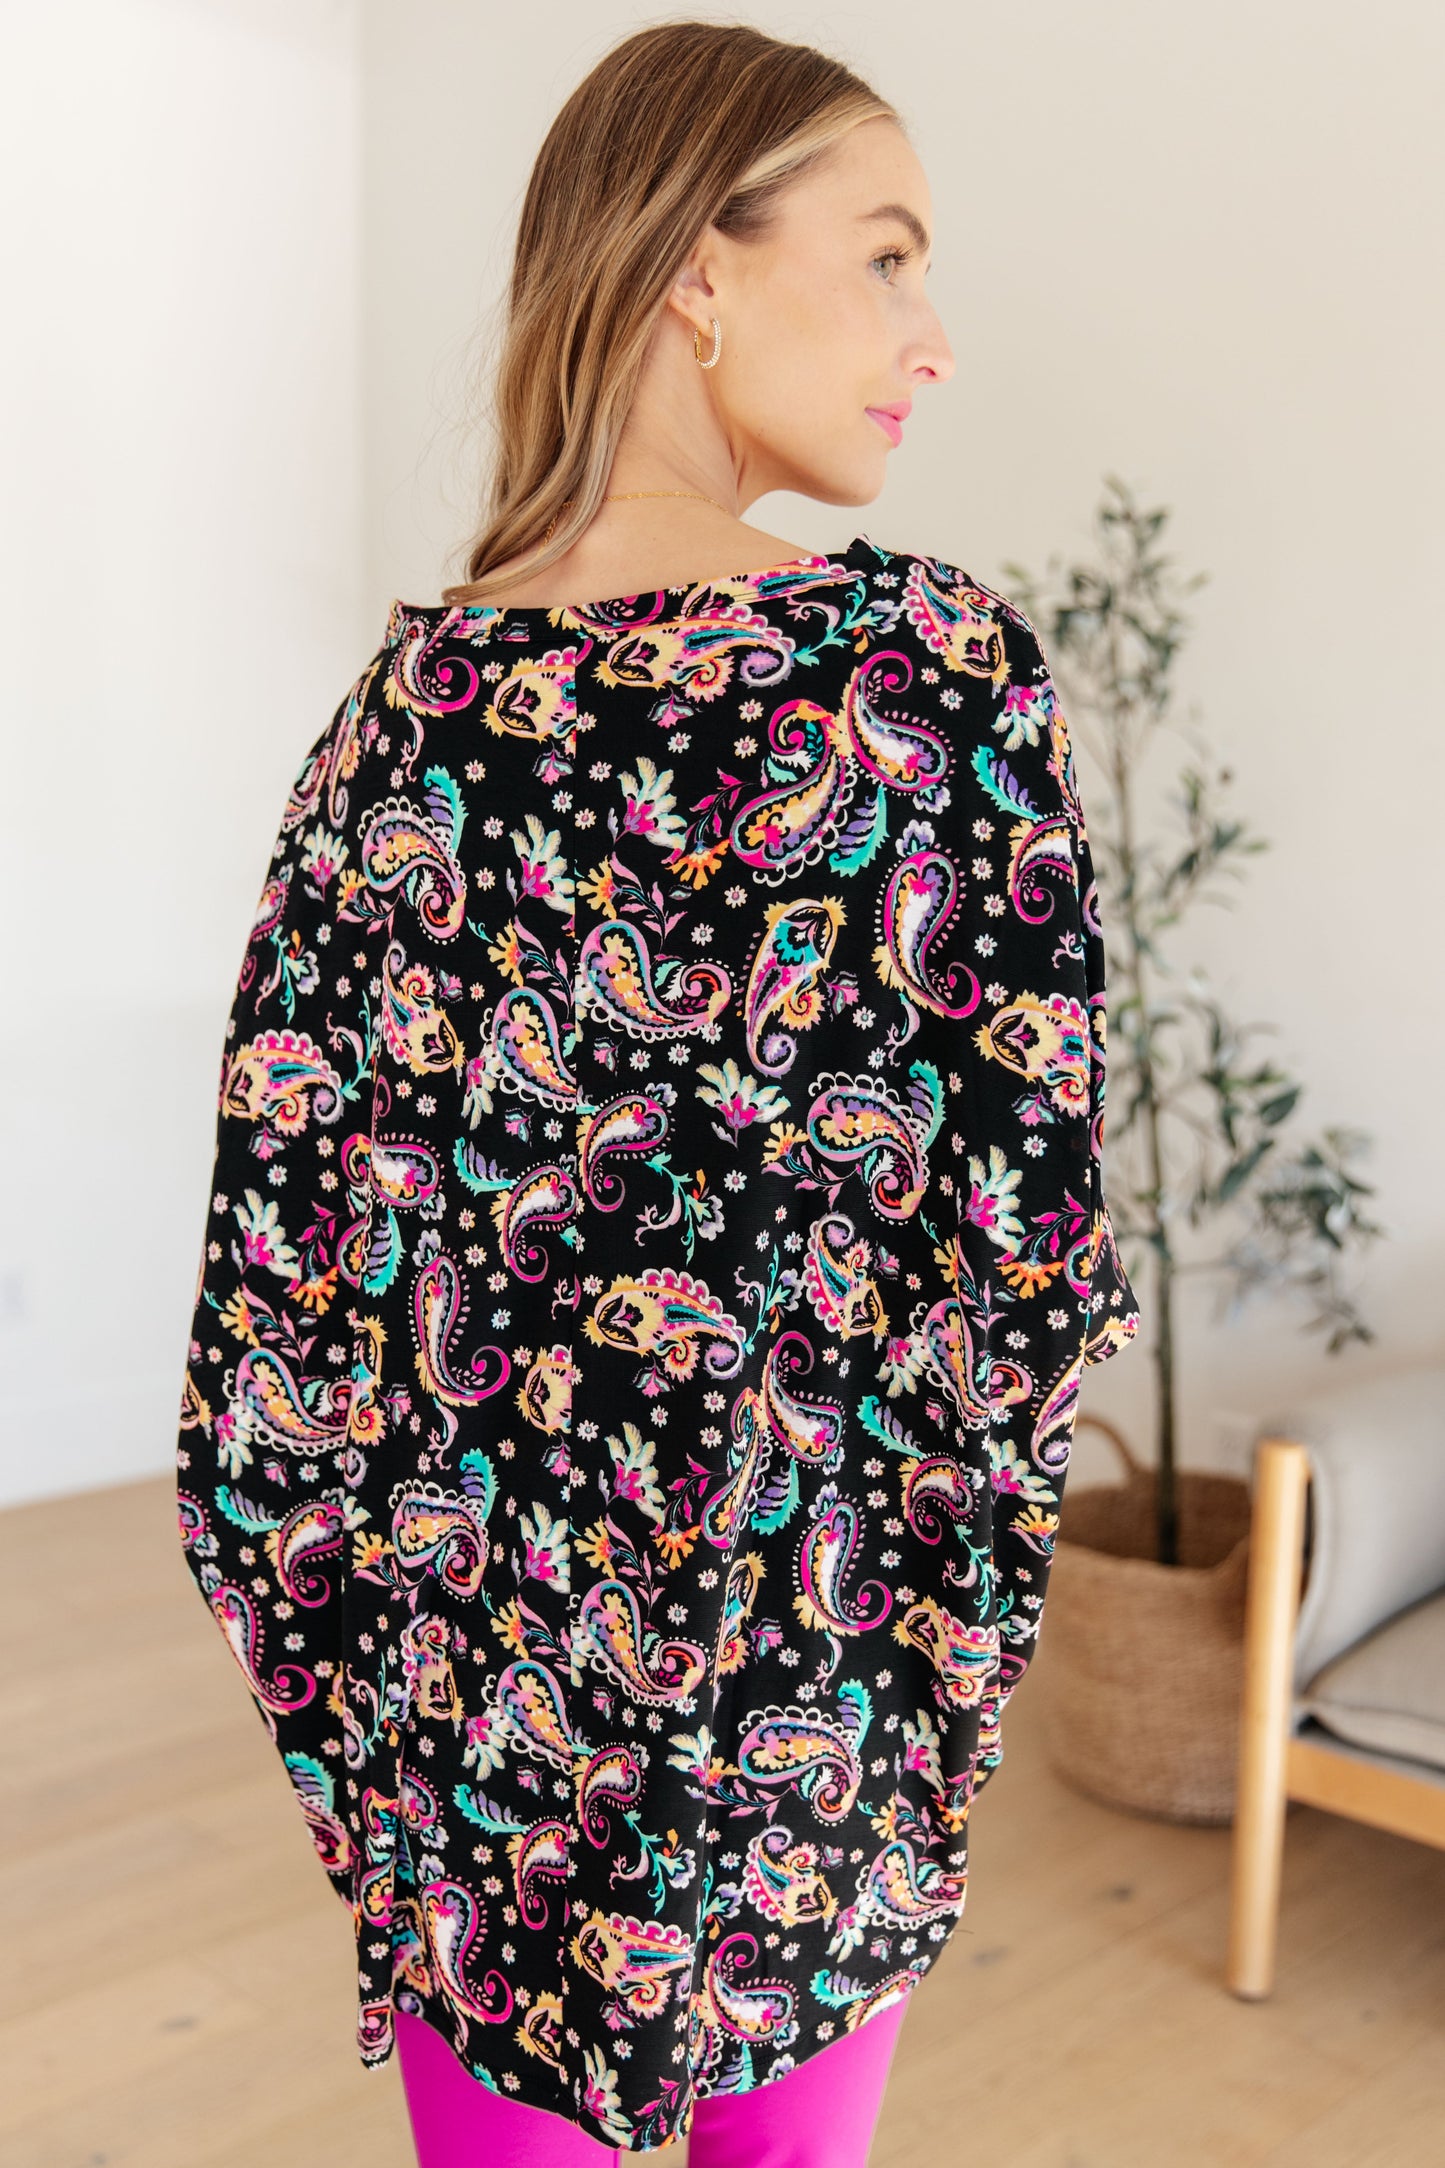 Blouse in Black and Pink Paisley